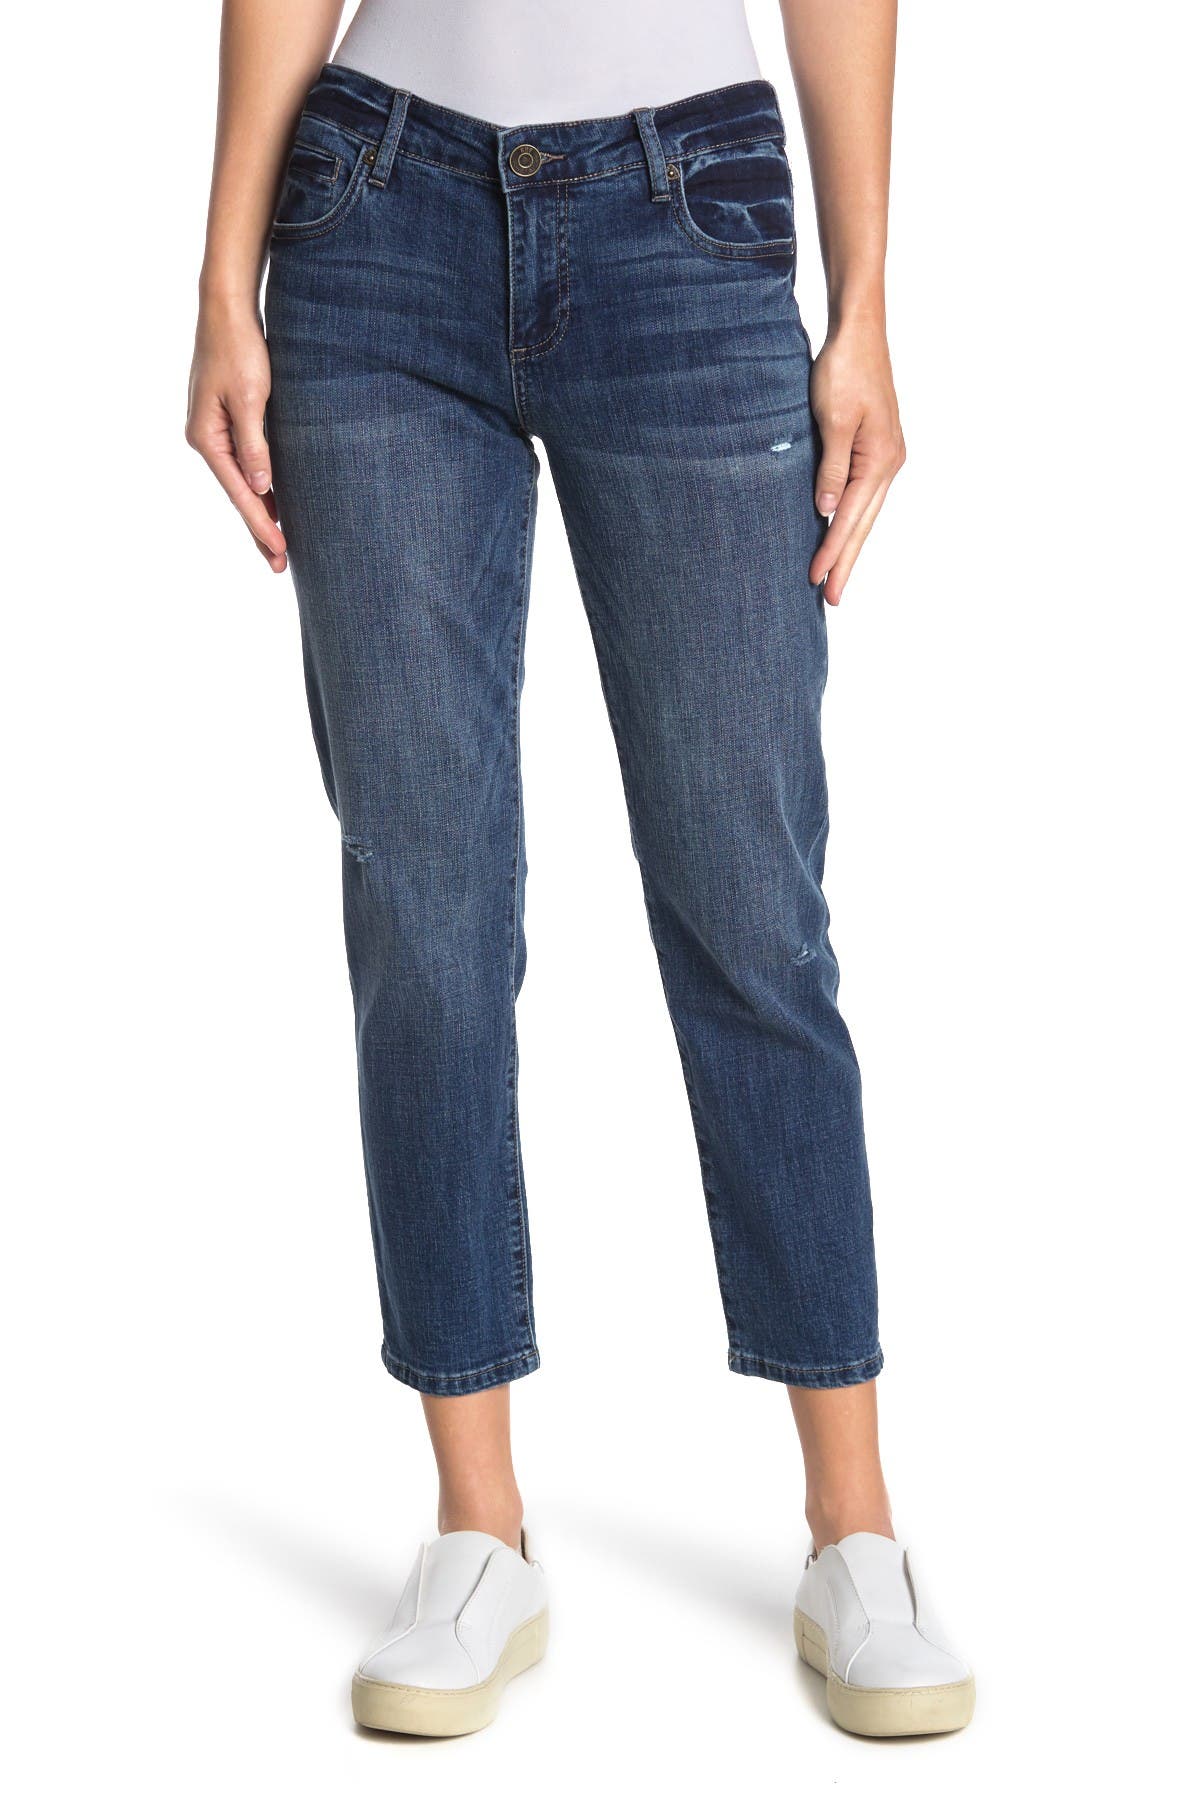 Kut From The Kloth Katy Ankle Crop Straight Leg Jeans In Open Miscellaneous12